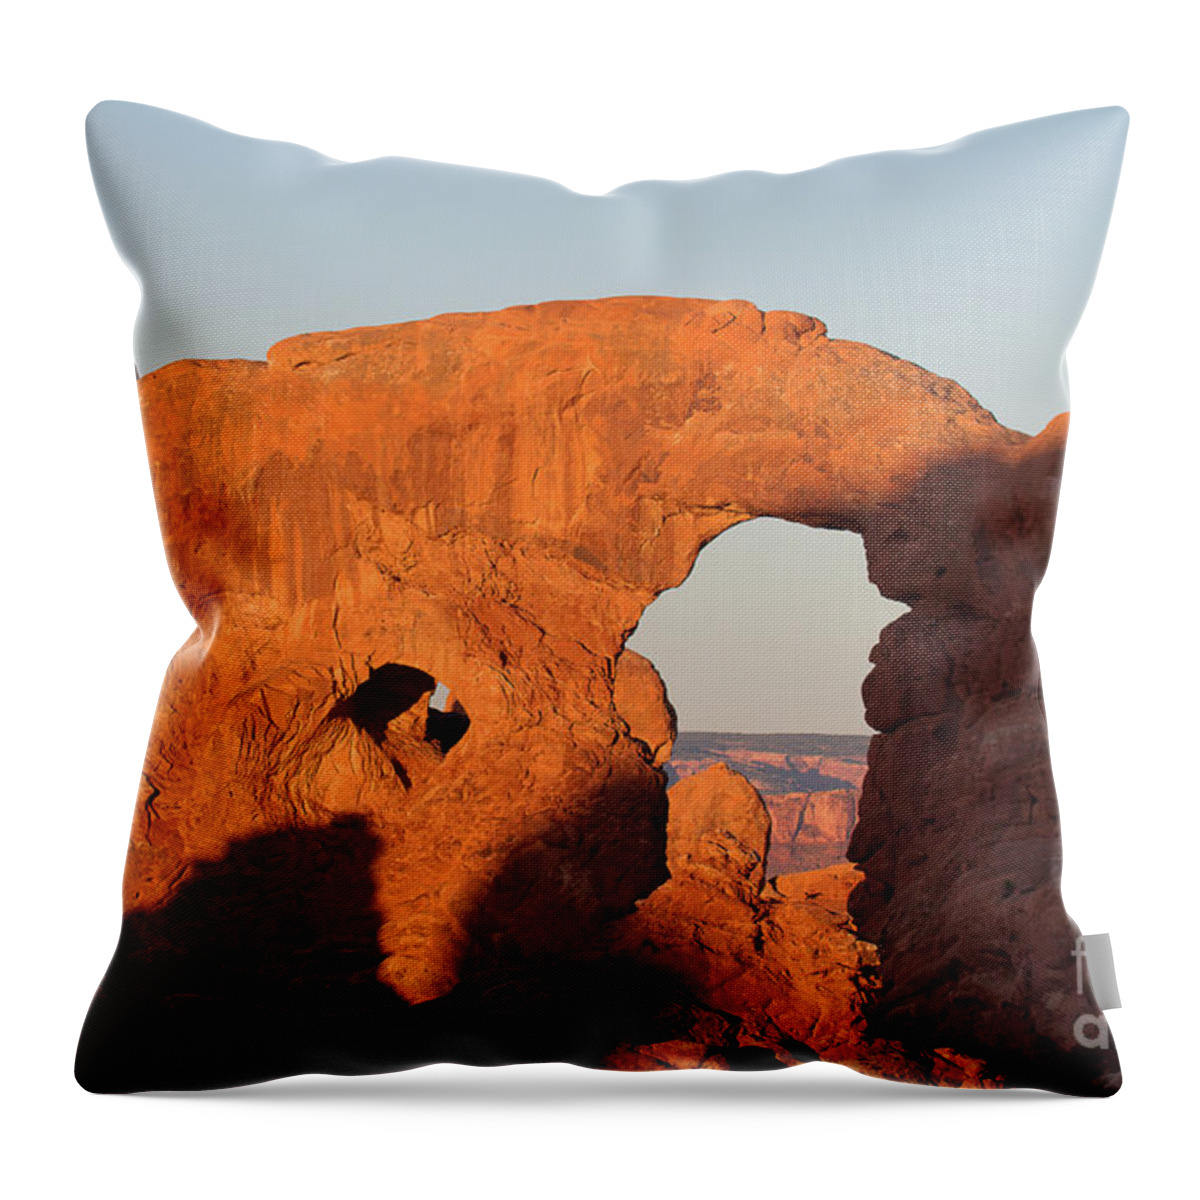 Utah Landscape Throw Pillow featuring the photograph The Elephant's Trunk by Jim Garrison